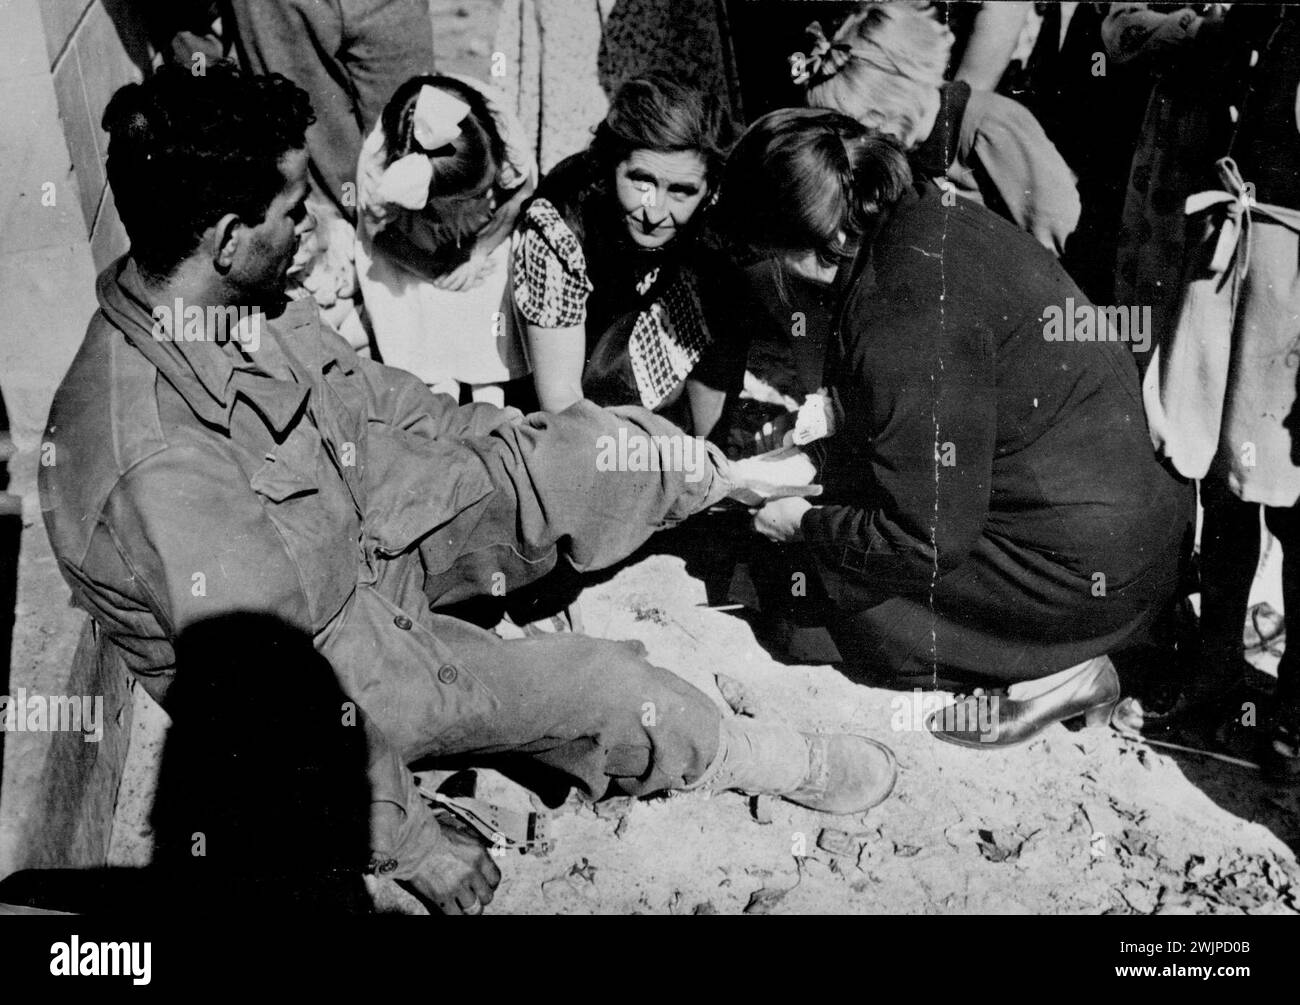 Belgians Aid Wounded U. S. Soldier -- Wounded in the swift allied advance through Belgium, an American infantryman has his foot bandaged by Belgian residents of the fortress town of Eben-Emael while his comrades push on toward the Netherlands and Germany. Rising against their oppressors, the Belgians gave valuable aid to the Allies, who had liberated most of the country less than three weeks after the first spearheads crossed into its borders on Sept. 2, 1944. November 10, 1944. Stock Photo